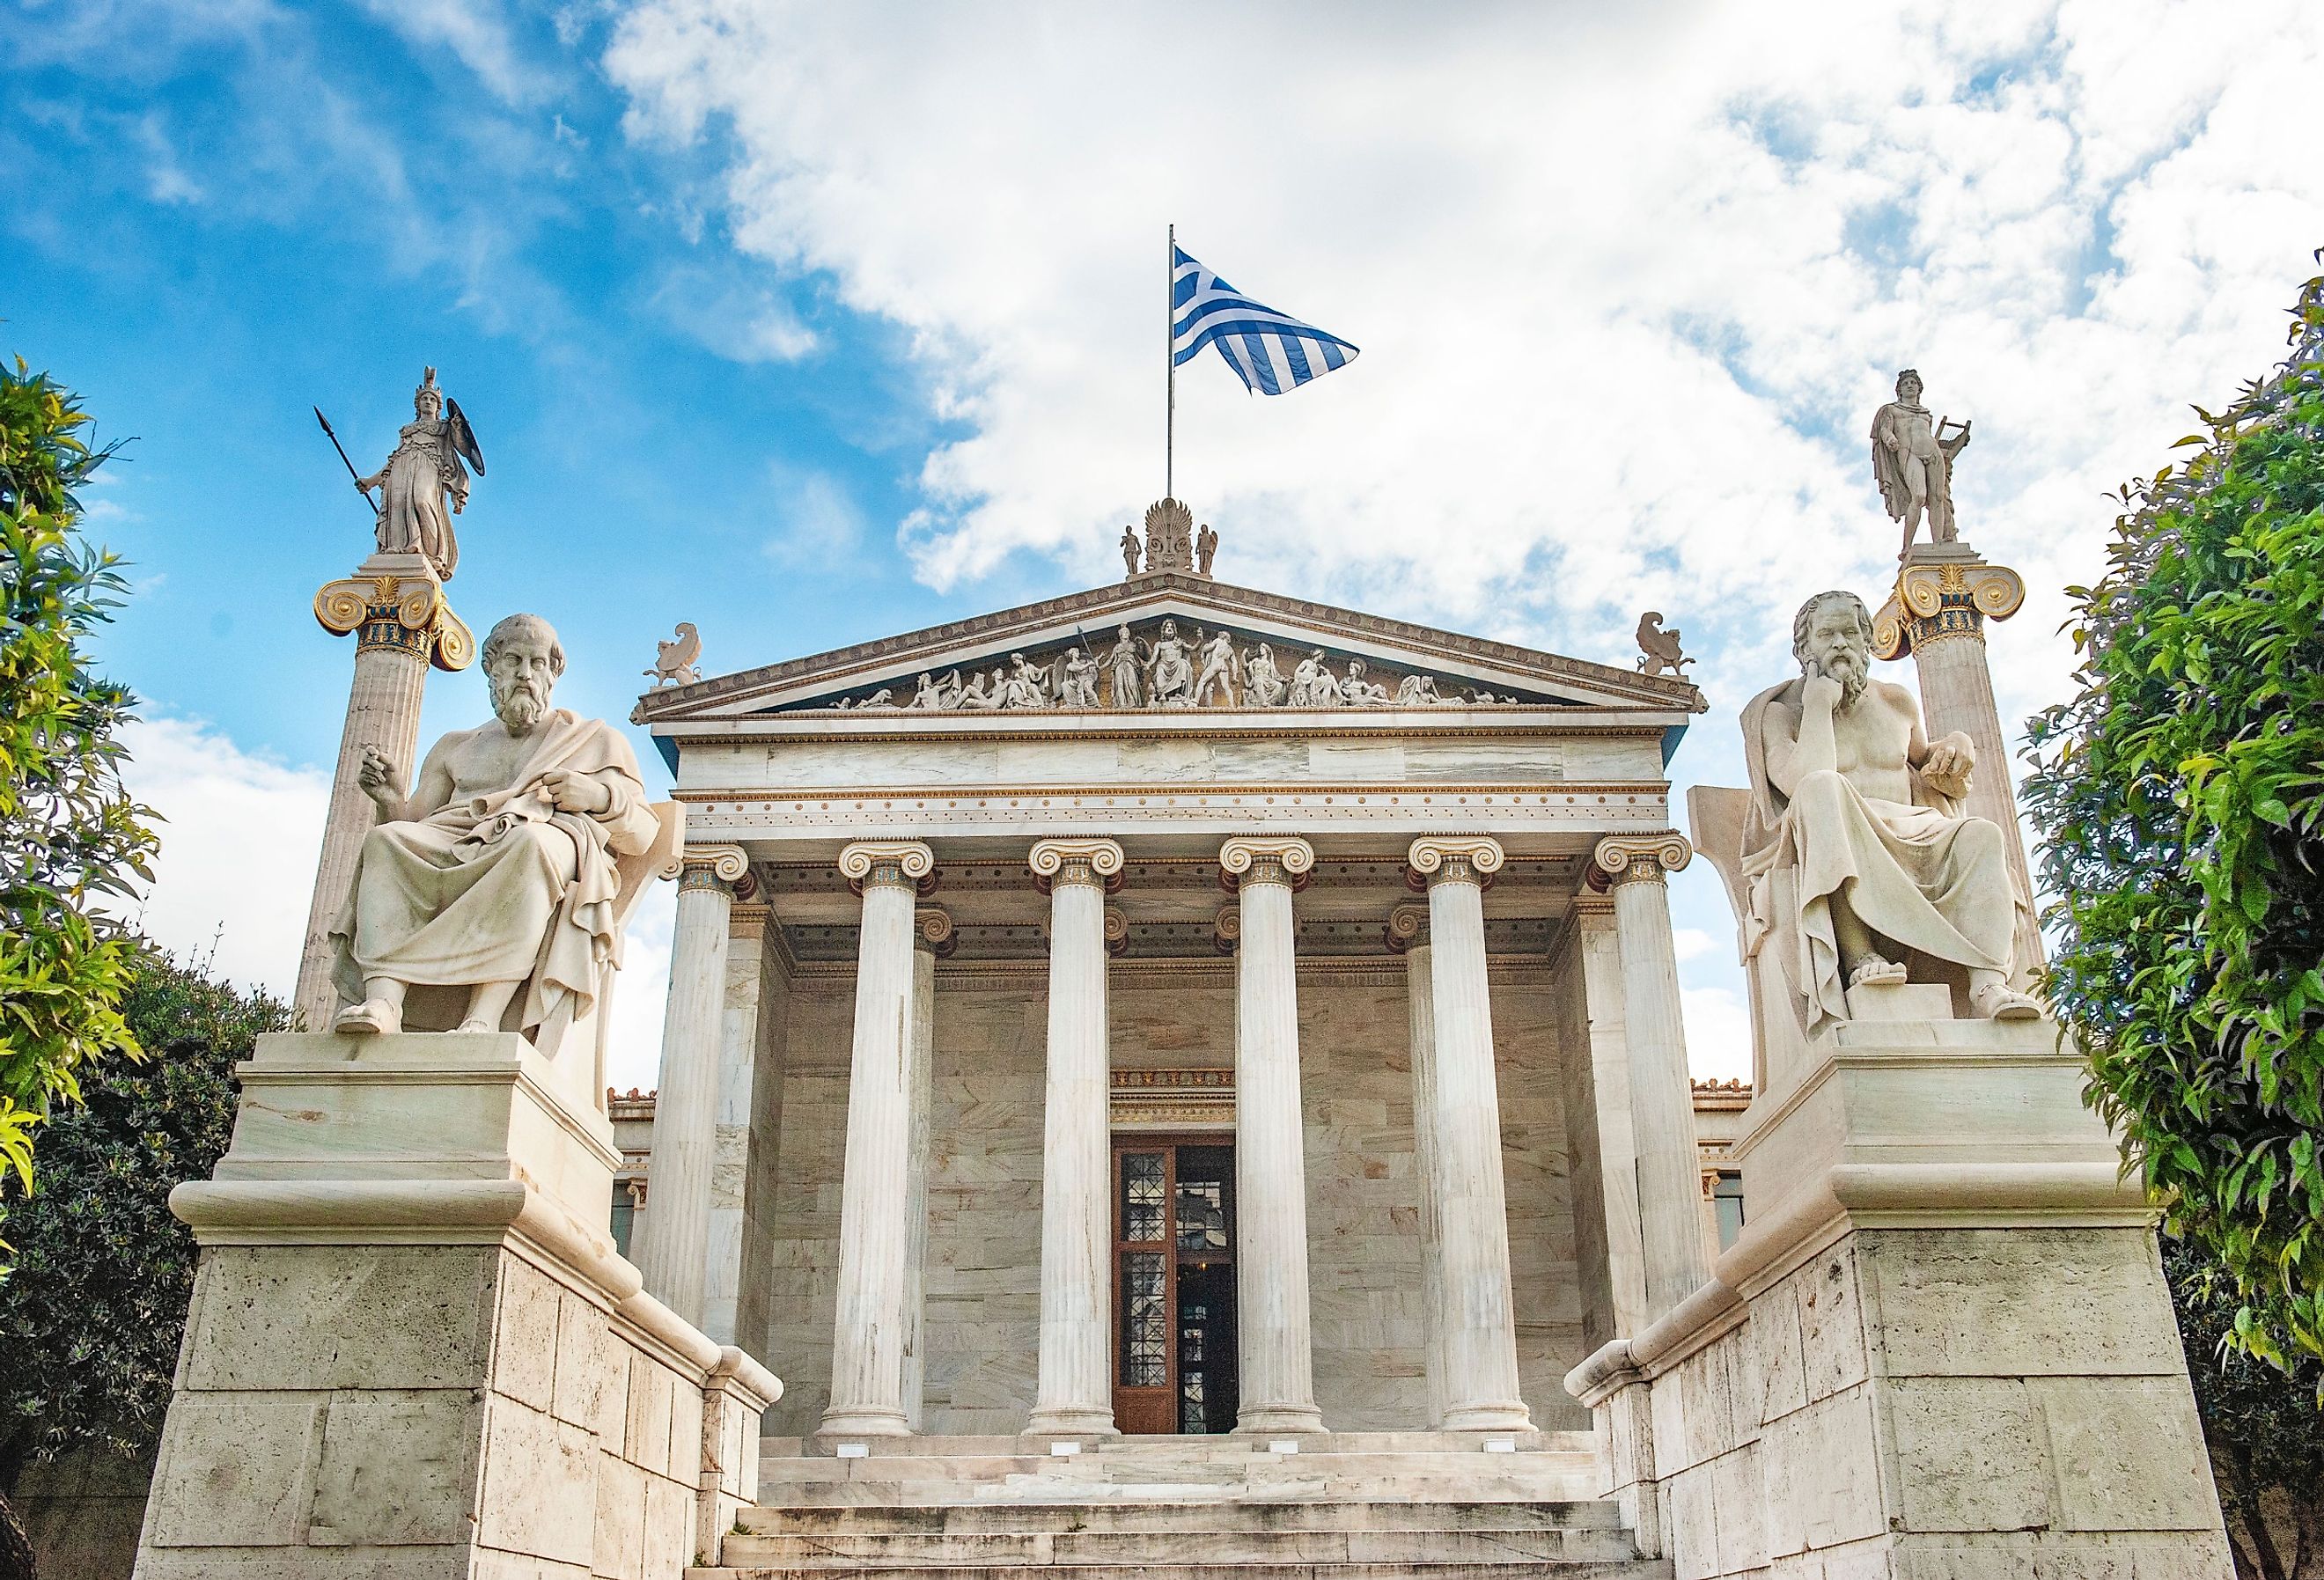 The Academy of Athens, an impressive classic architecture in Athens, Greece.